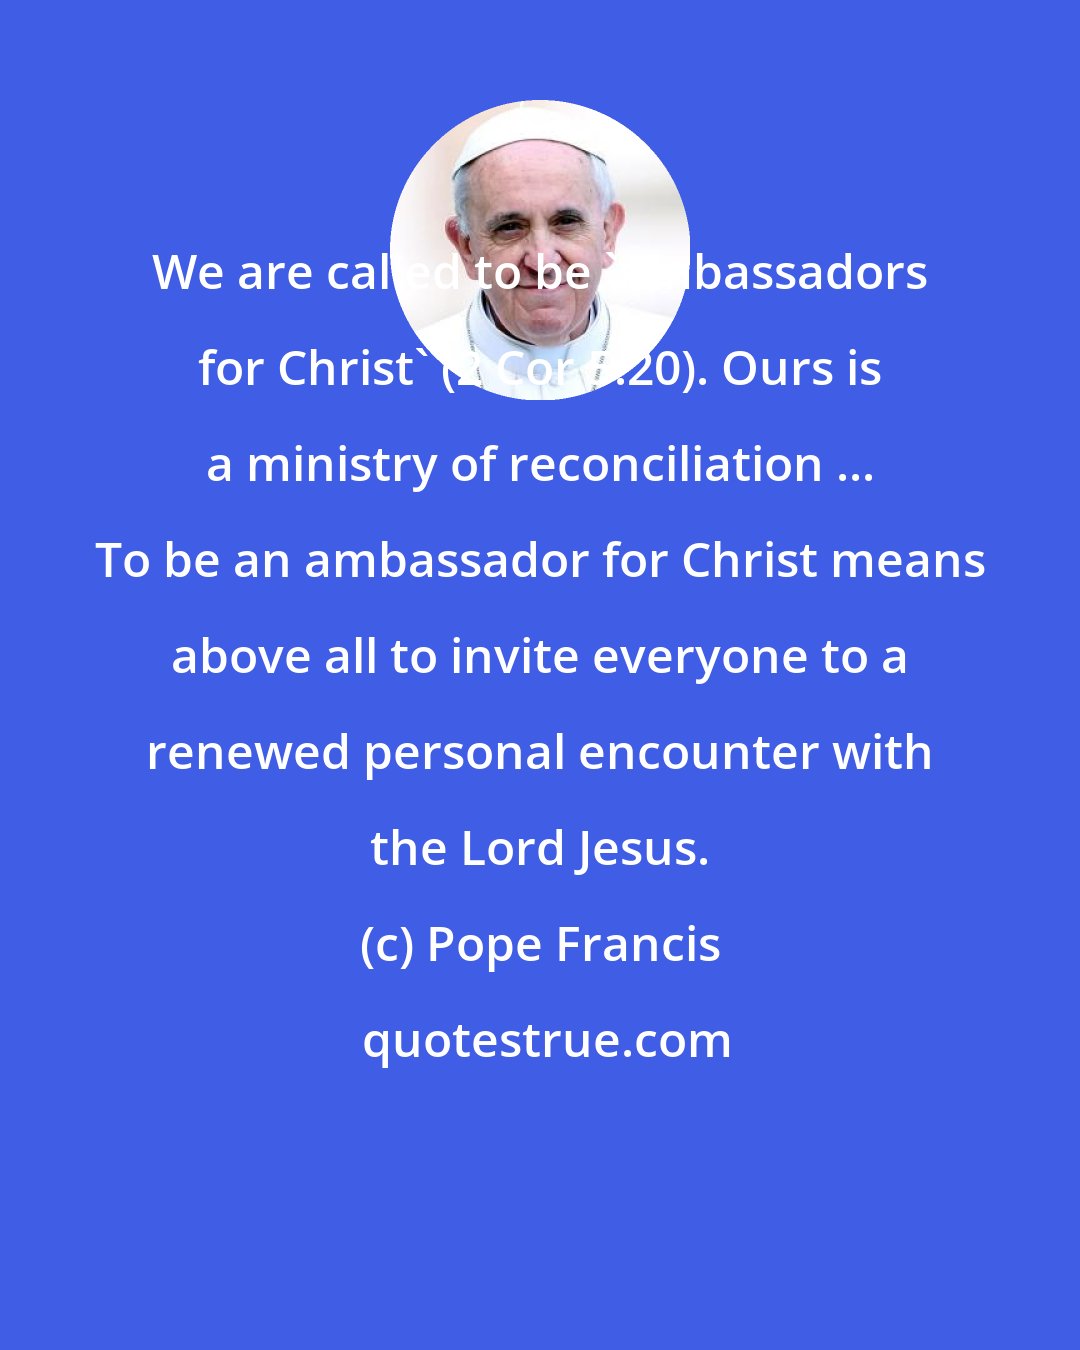 Pope Francis: We are called to be 'ambassadors for Christ' (2 Cor 5:20). Ours is a ministry of reconciliation ... To be an ambassador for Christ means above all to invite everyone to a renewed personal encounter with the Lord Jesus.